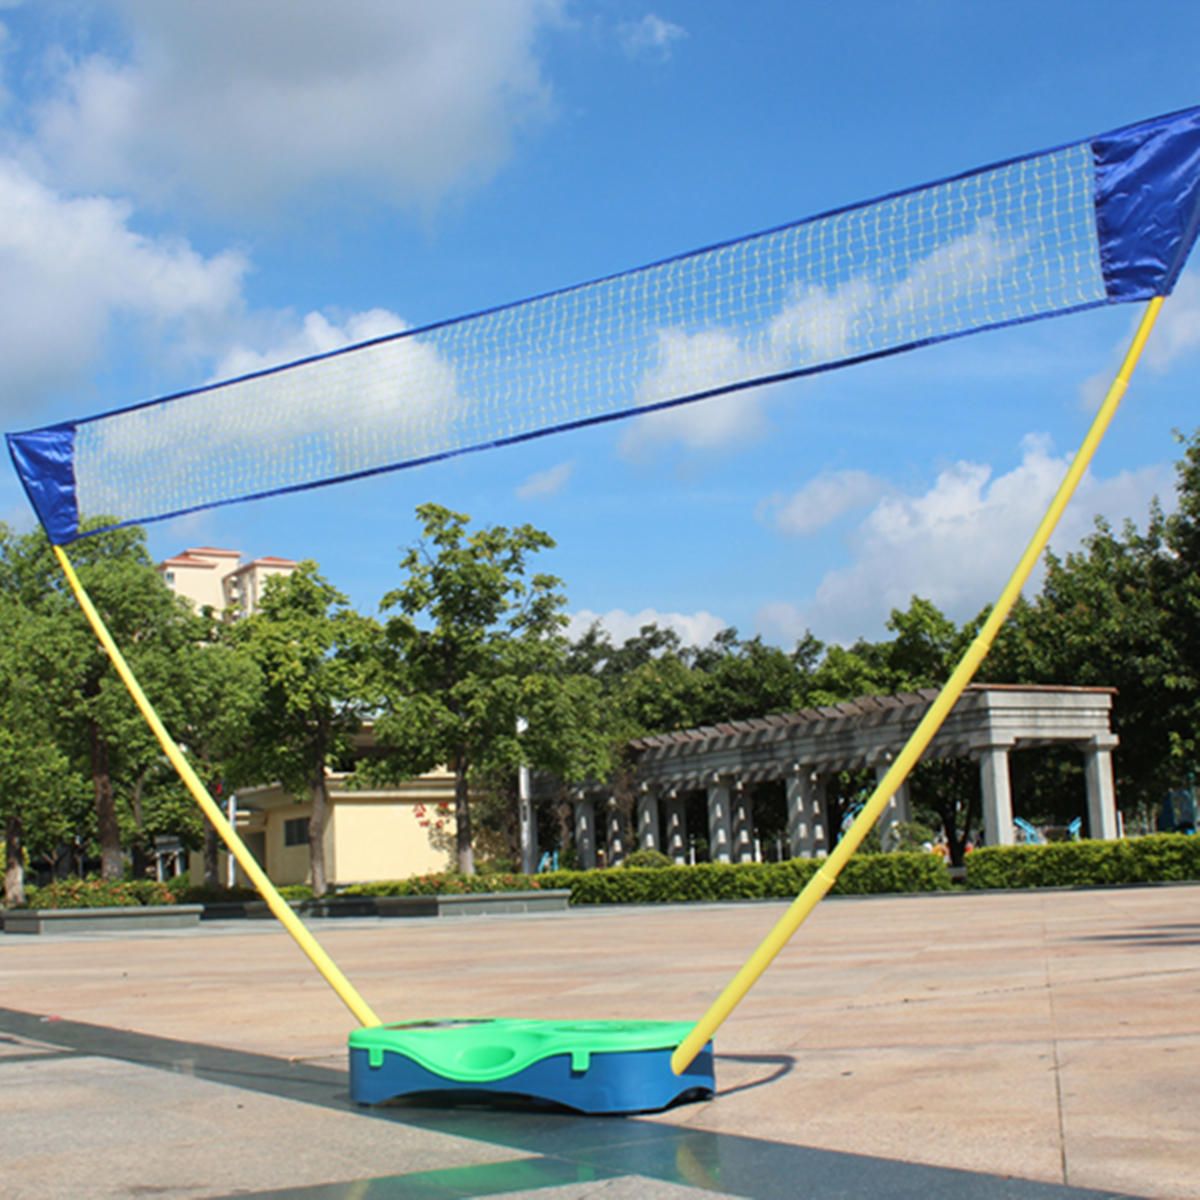 Outdoor Badminton Net With Plastic Base 3 In 1 Outdoor Sport Badminton Tennis Volleyball Net Portable Stand Battledore Set From Jetboard, $20.11 DHgate